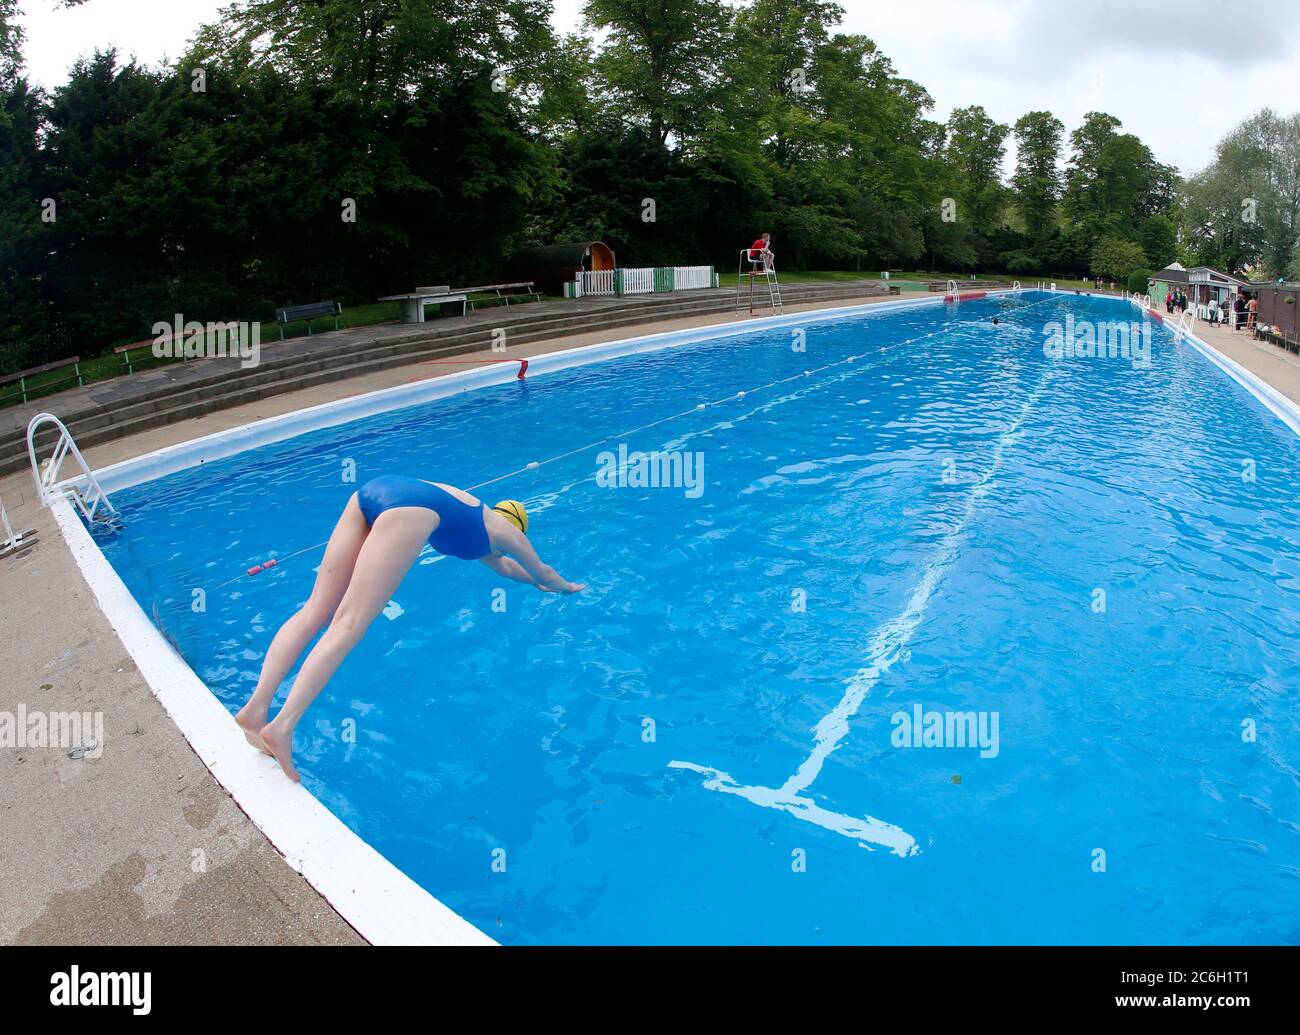 Cambridge, UK. 10th July 2020 The UK government announced that outside swimming pools can open from Saturday 10th July 2020. Jesus Green Lido in Cambridge hopefully is one of those, pictured here in busier times.  Credit: Headlinephoto/Alamy Live News Stock Photo